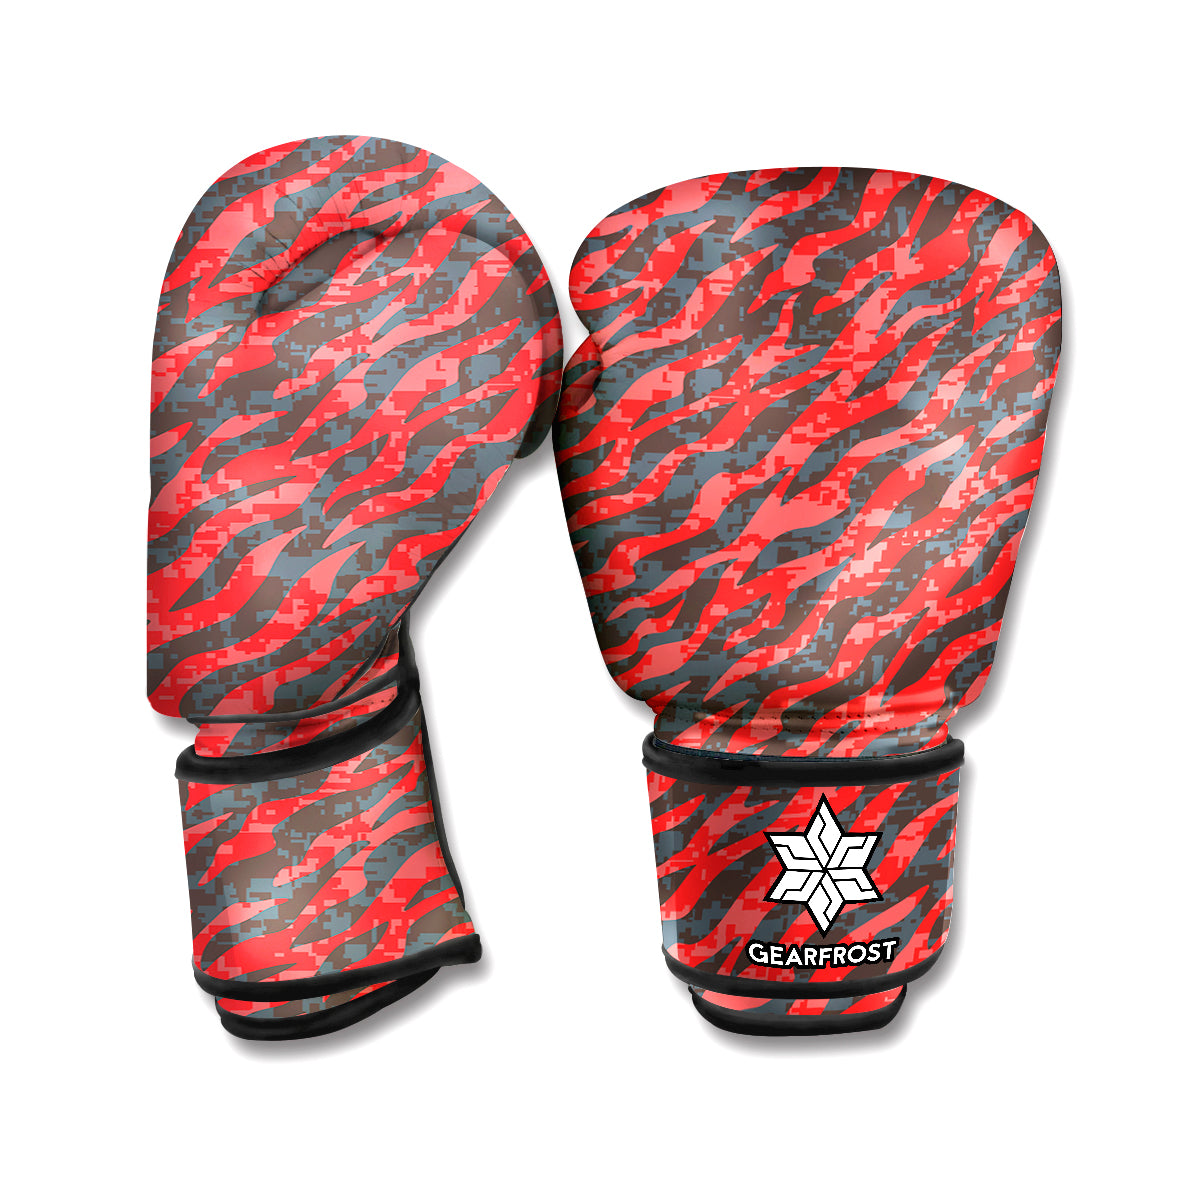 Black And Red Tiger Stripe Camo Print Boxing Gloves